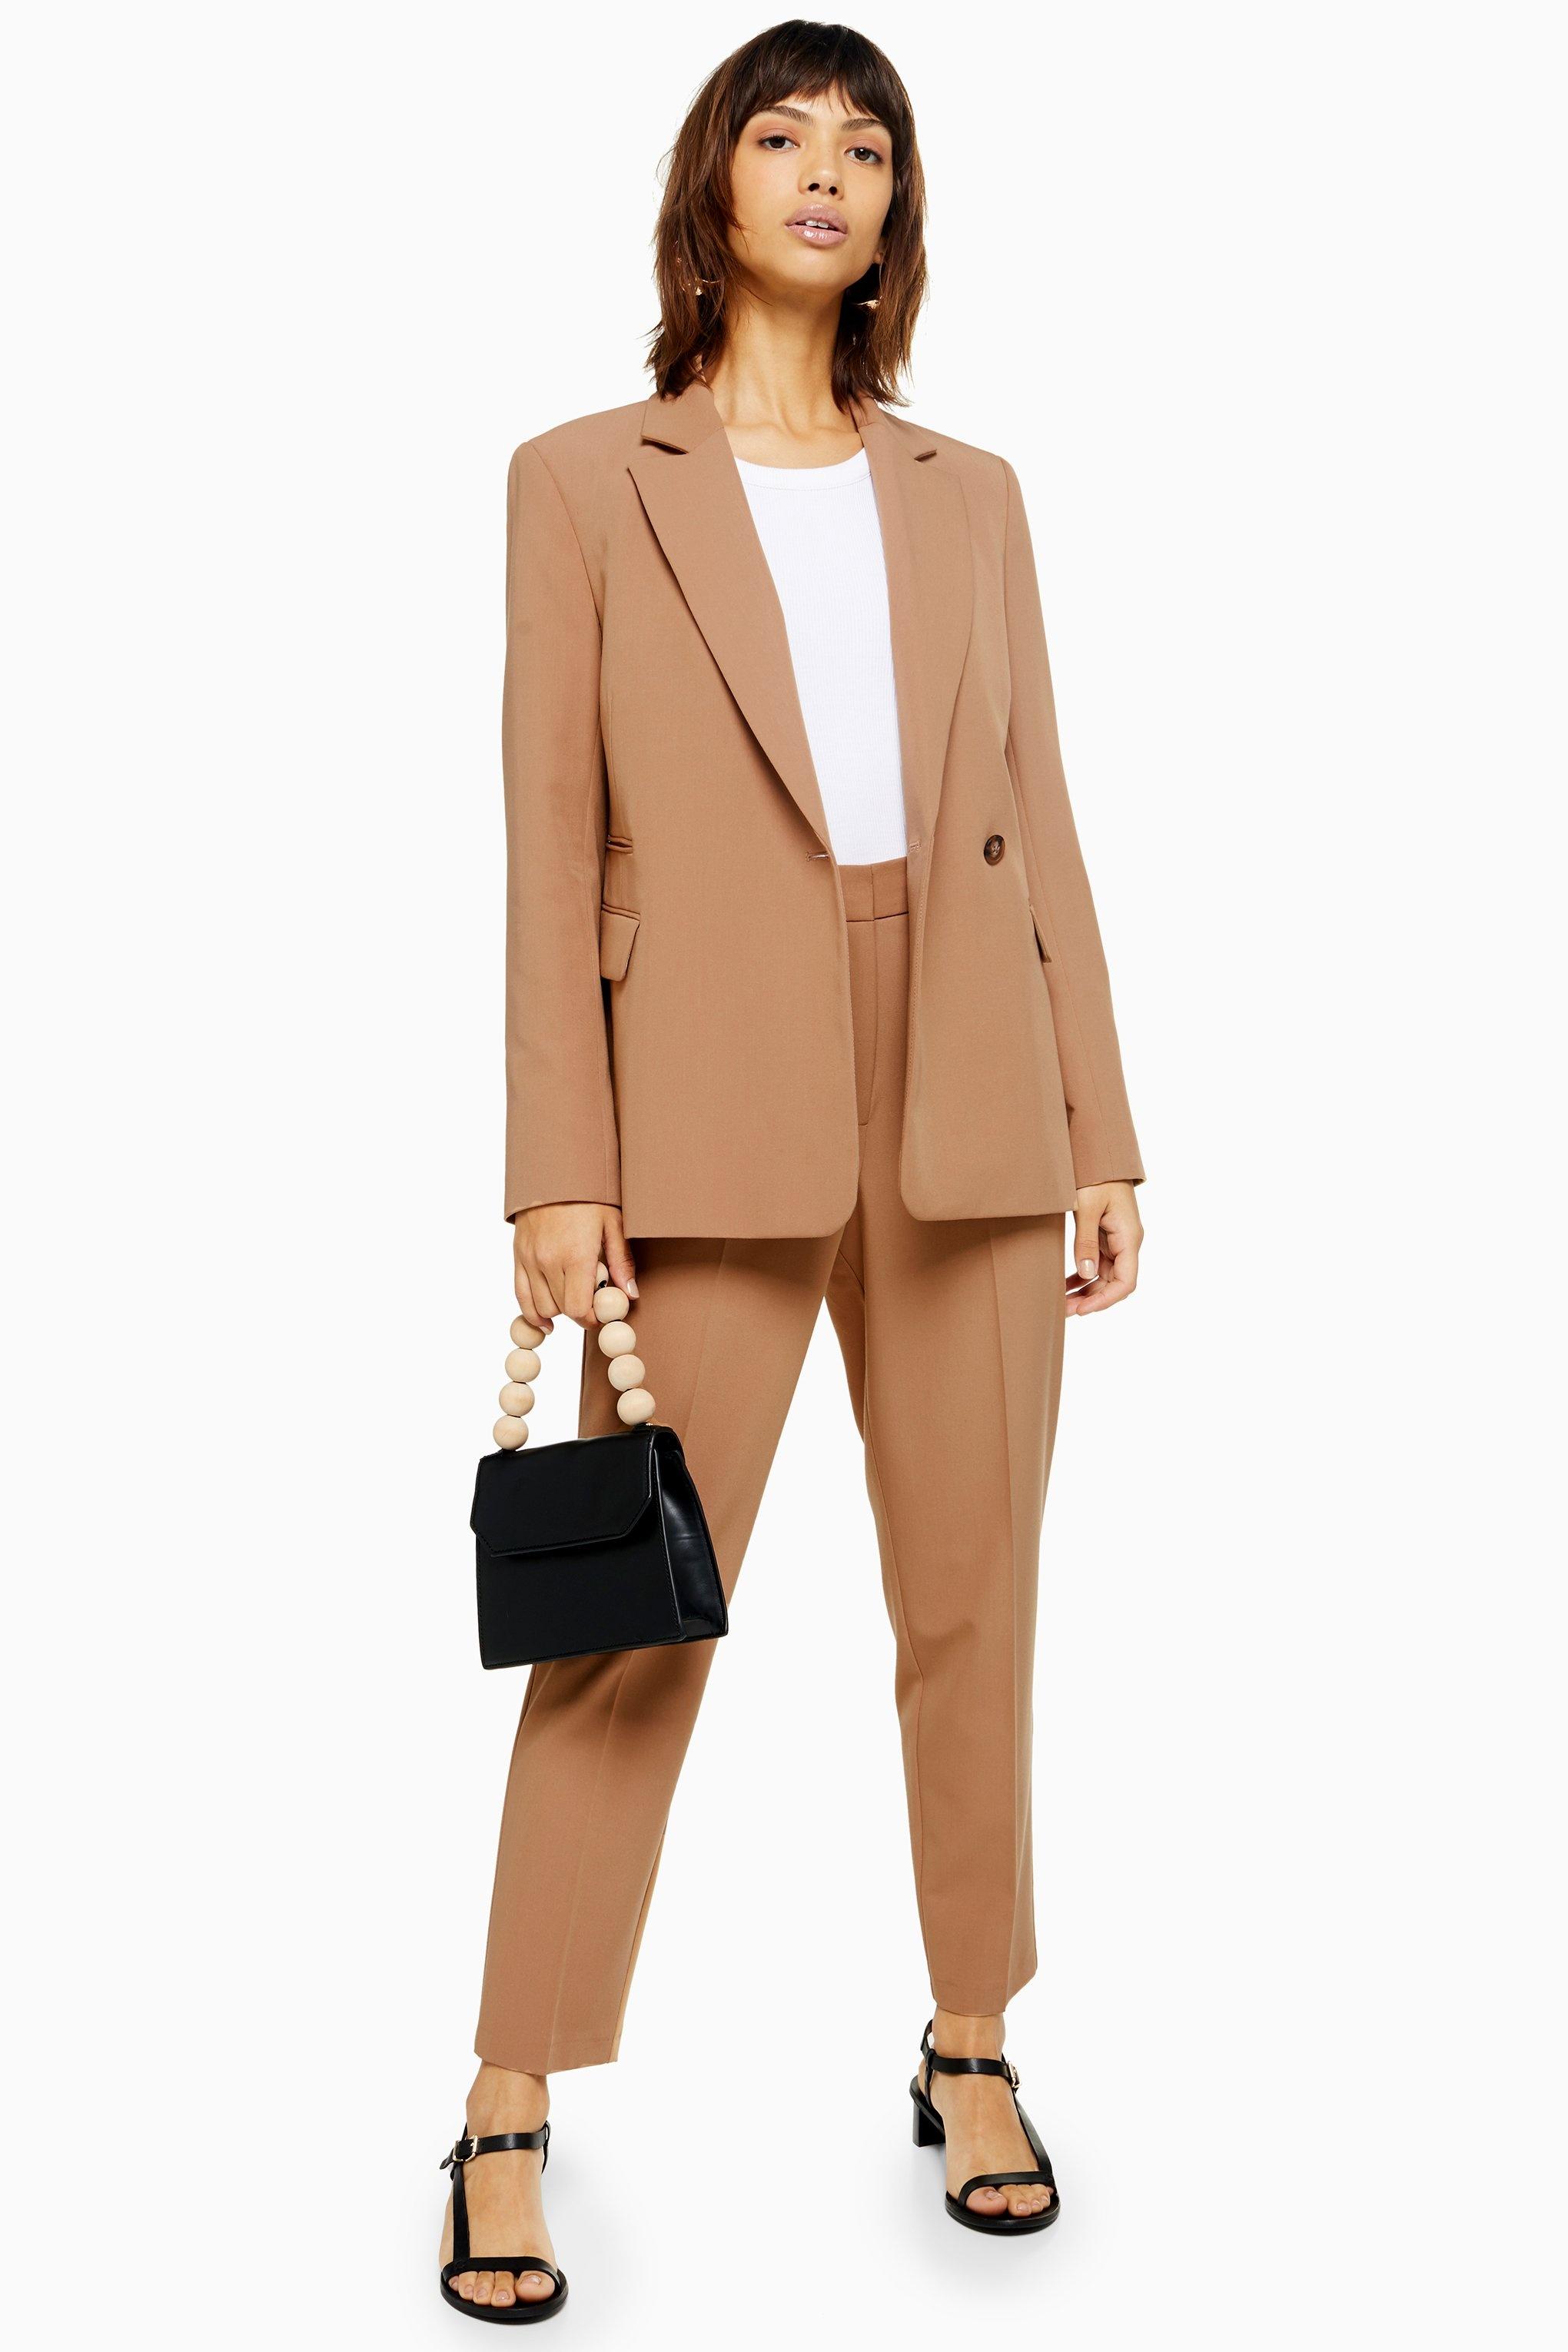 TOPSHOP Synthetic Double Breasted Blazer in Camel (Natural) - Lyst